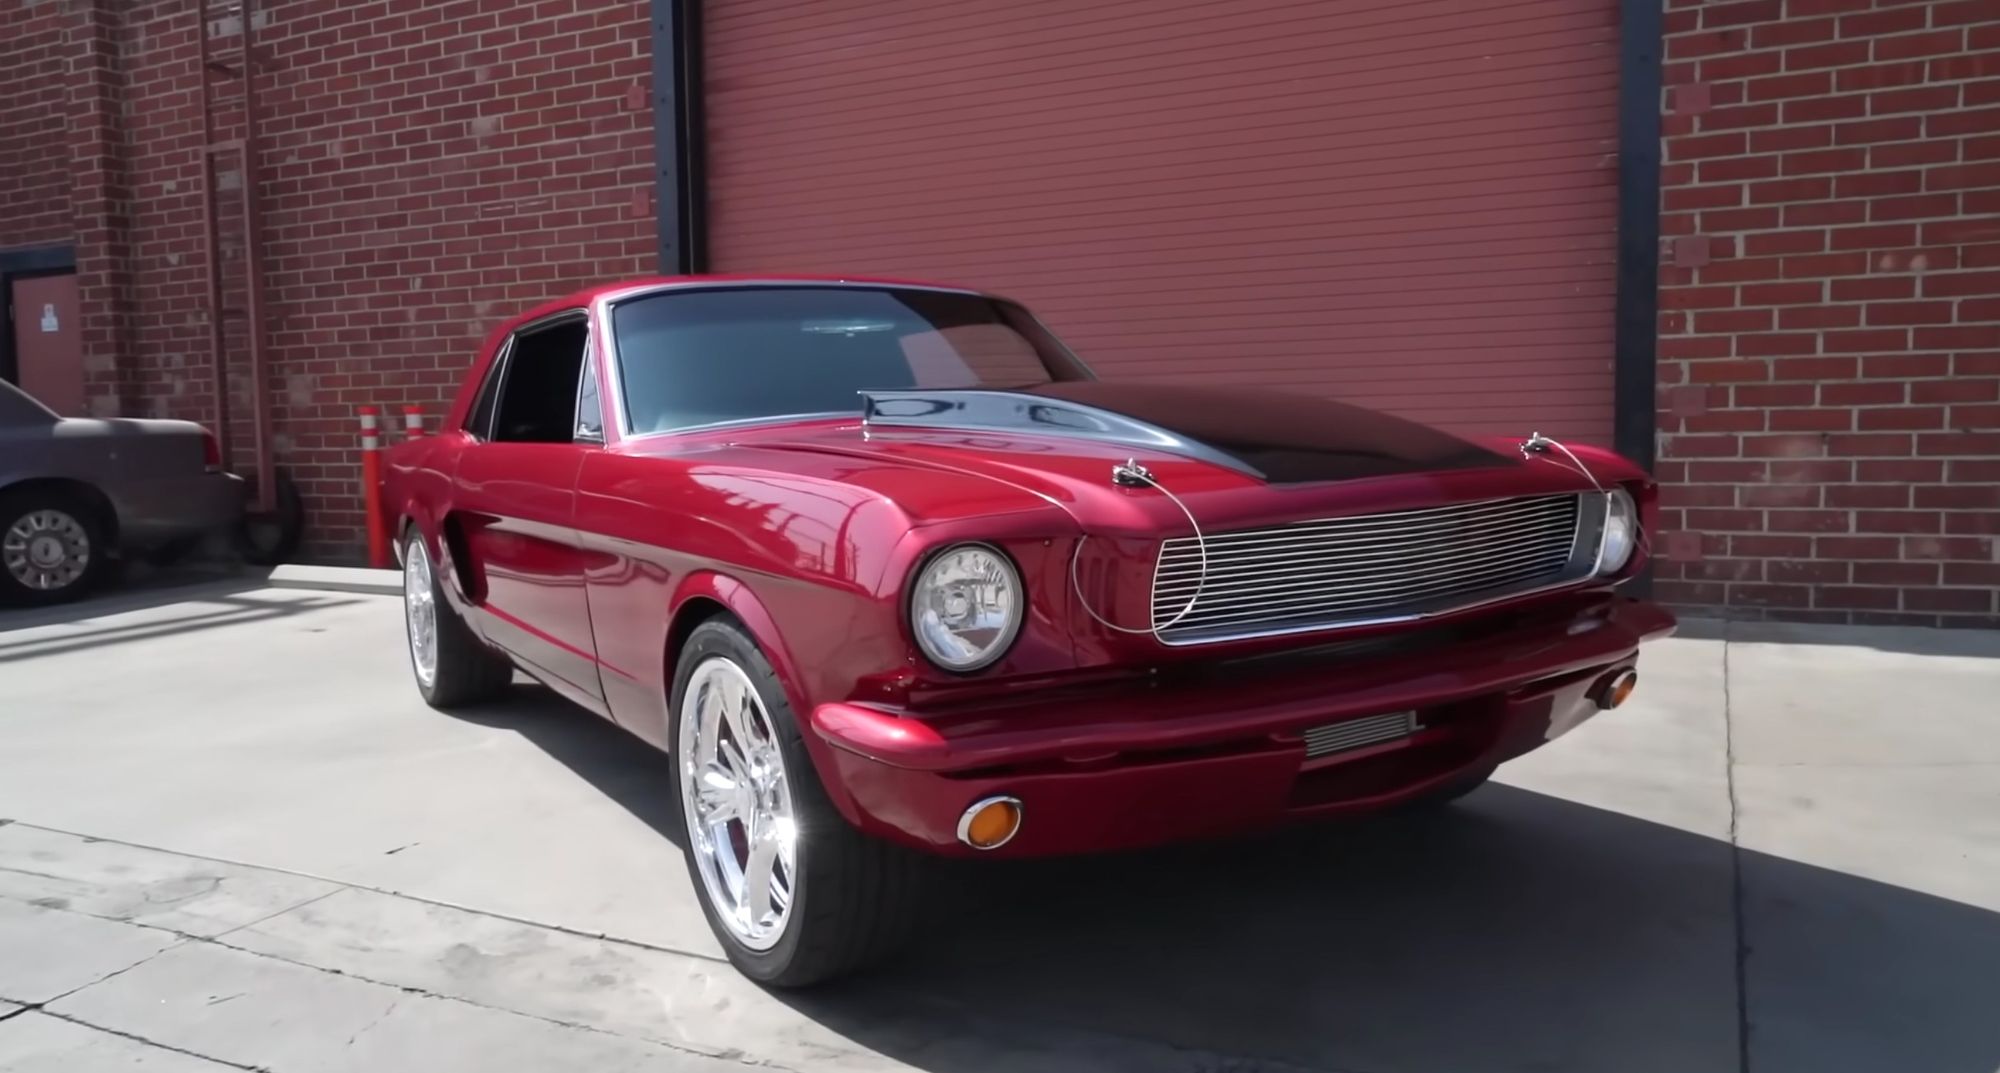 Garage Built 427 Stroker 1965 Ford Mustang Will Steal Your Heart